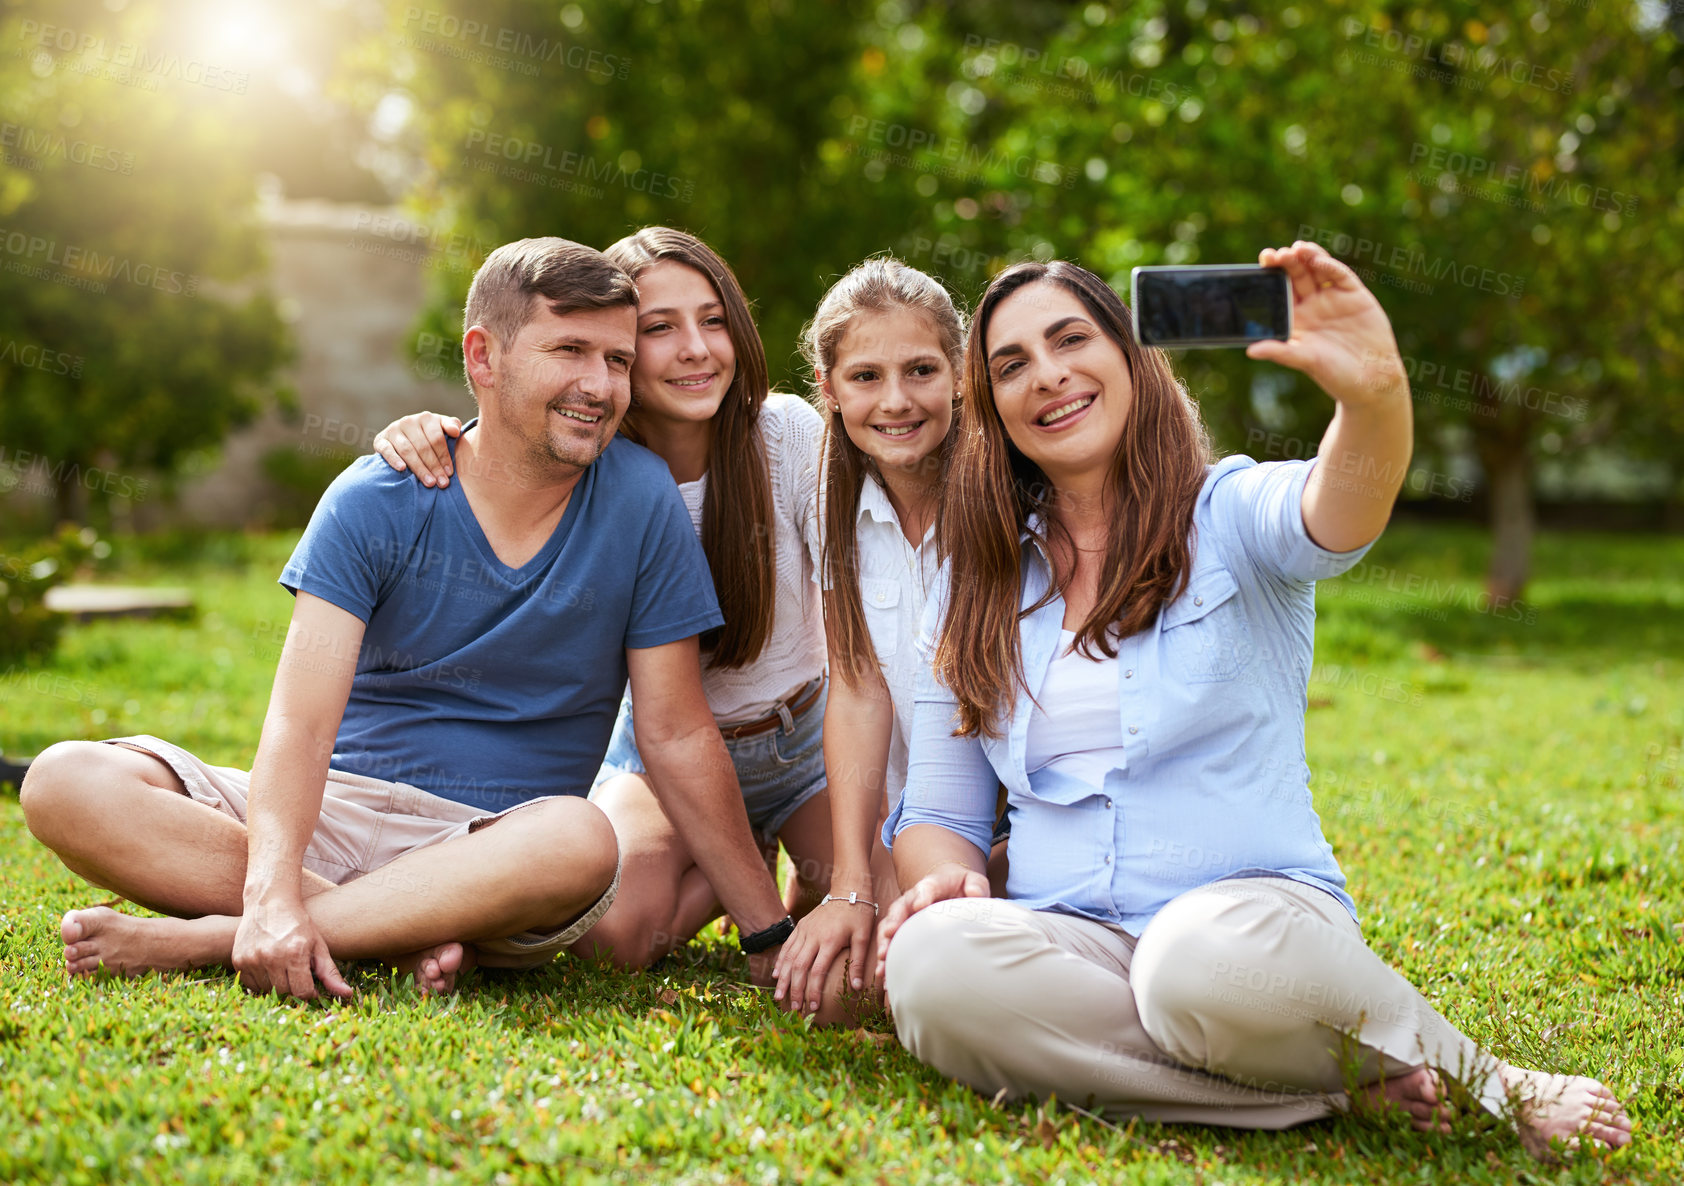 Buy stock photo Shot of a cheerful family seated in a park while taking a self portrait together outside during the day